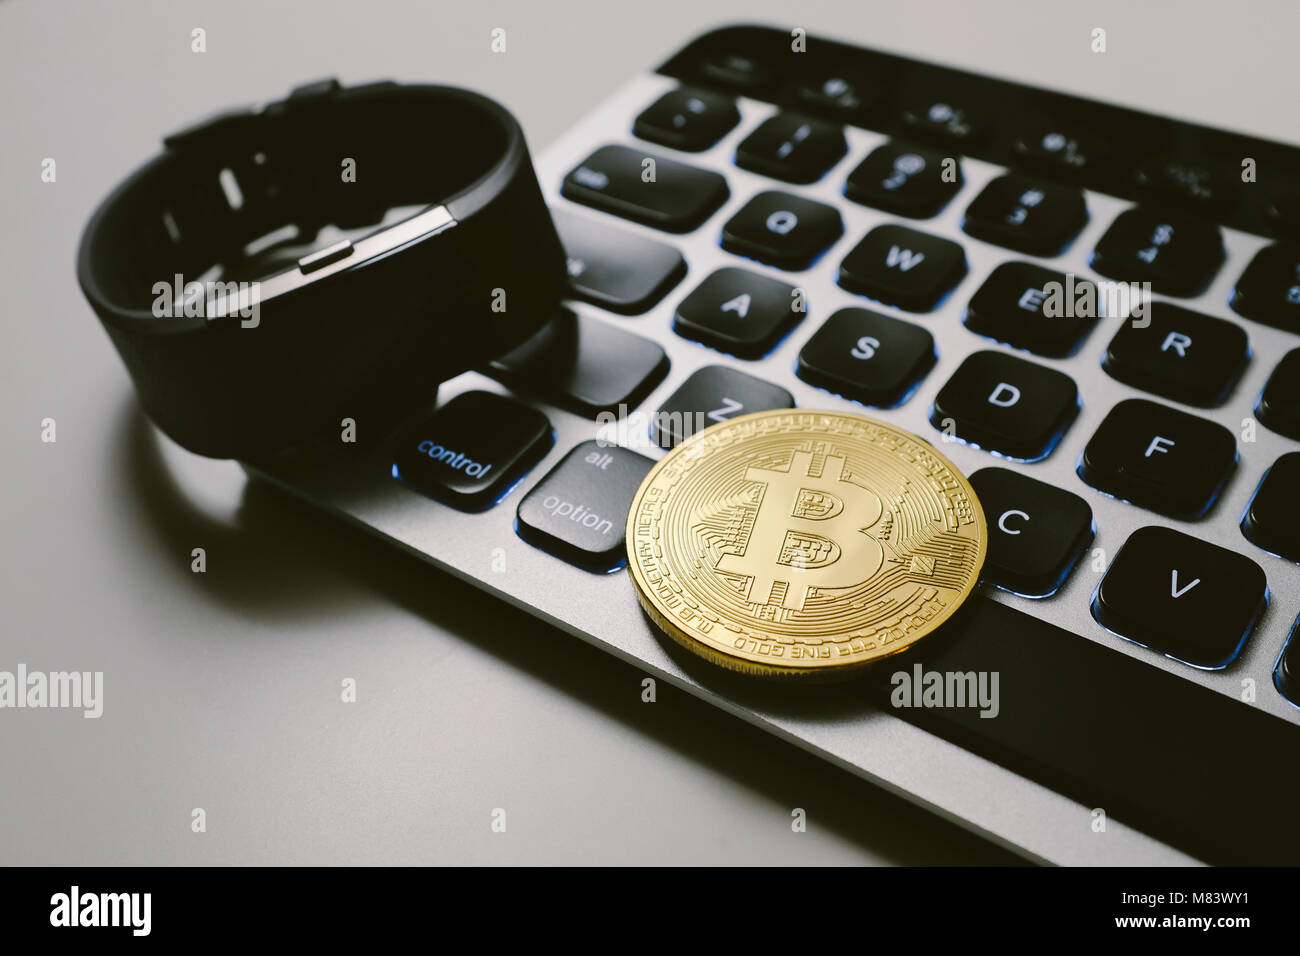 Bitcoin on keyboard with fitness tracker watch Stock Photo